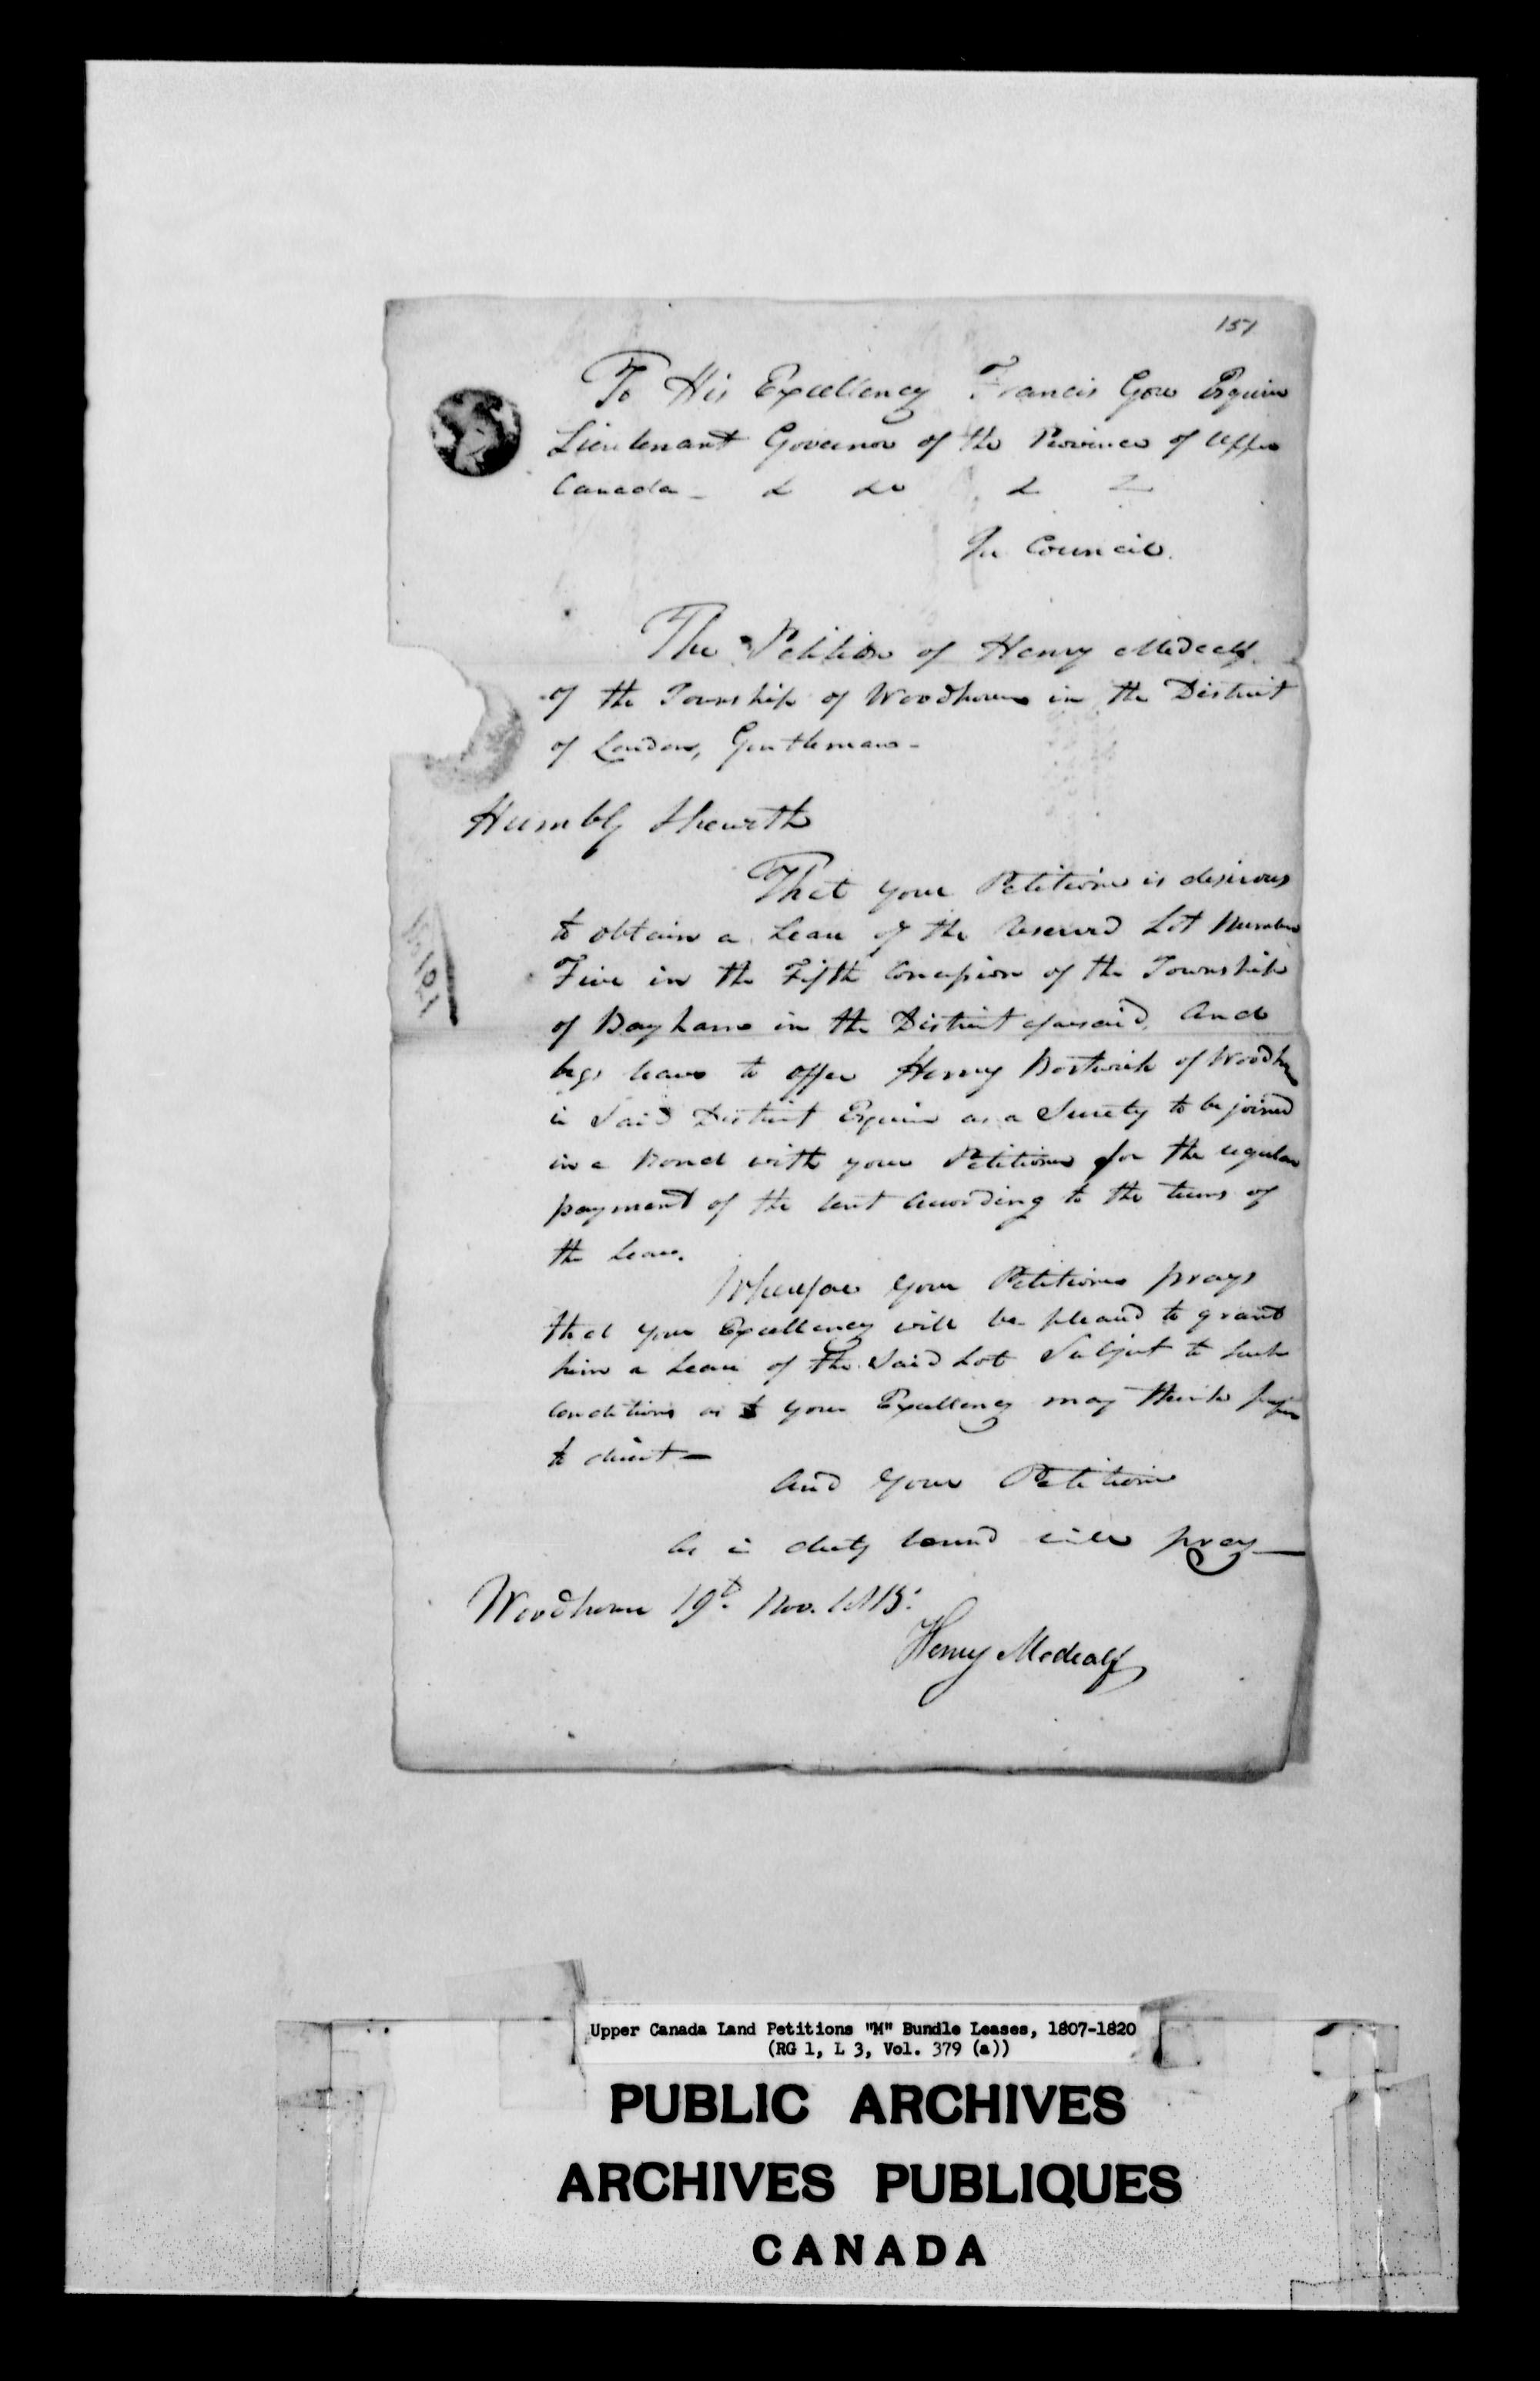 Title: Upper Canada Land Petitions (1763-1865) - Mikan Number: 205131 - Microform: c-2235